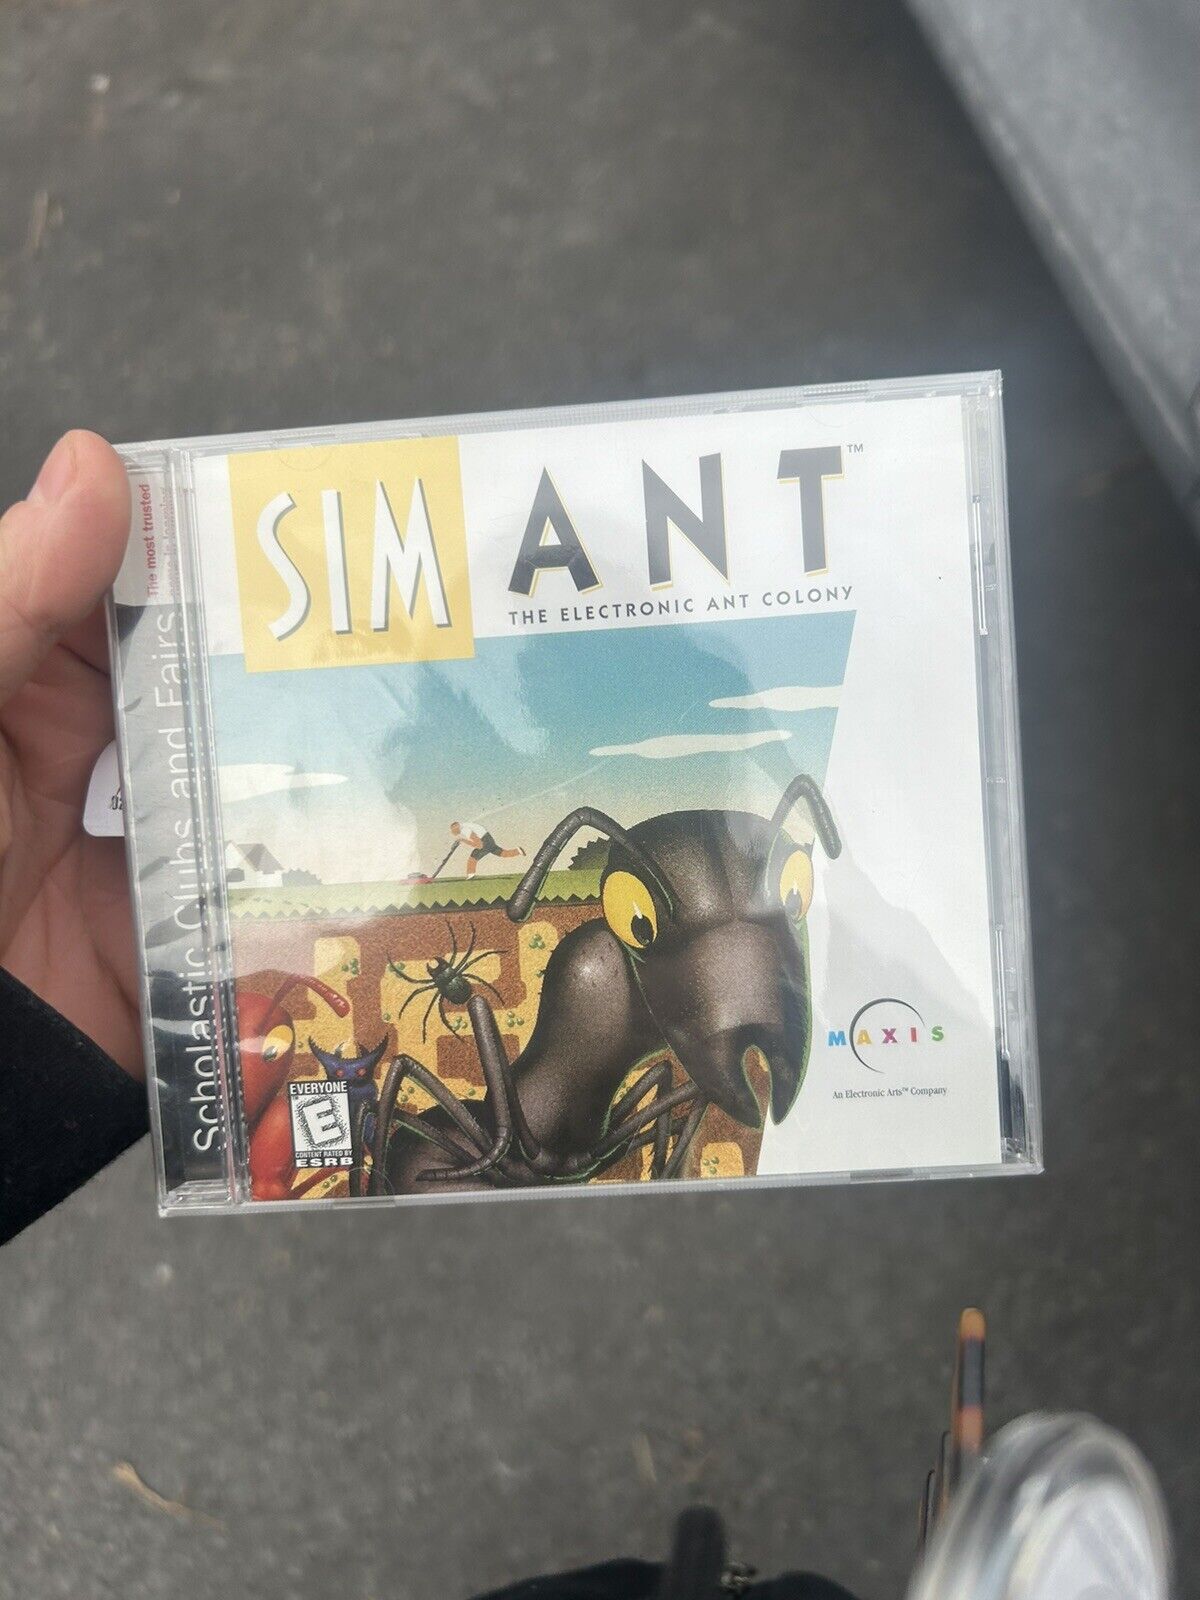 Maxis Sim Ant Classics for PC/Mac, Vintage 1996 Collectible, New Retail CD